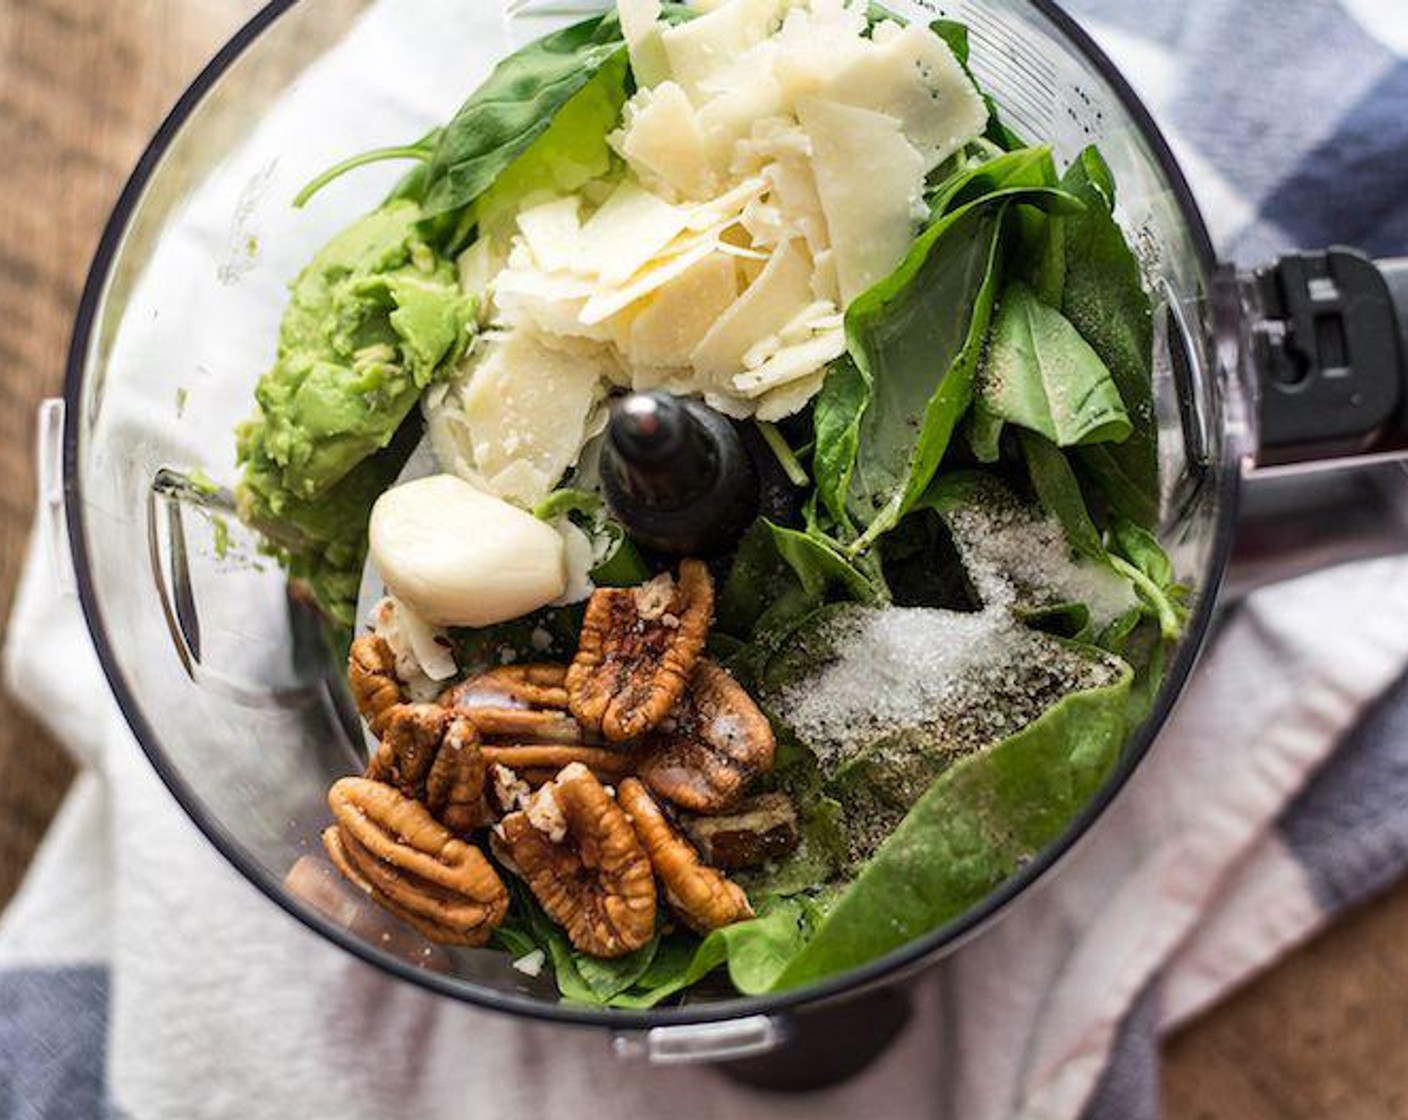 step 3 Then add Fresh Basil Leaf (1 cup), Fresh Spinach (1 cup), Pecans (1/4 cup), Parmesan Cheese (1/2 cup), Garlic (1 clove), 2 tsp Lemon (1), {@10:}, Ground Black Pepper (1/4 tsp), Coconut Oil (1 Tbsp), Avocado (1/2), and Water (3 Tbsp) to the bowl of a food processor, process 10-20 seconds or until a smooth consistency is reached.